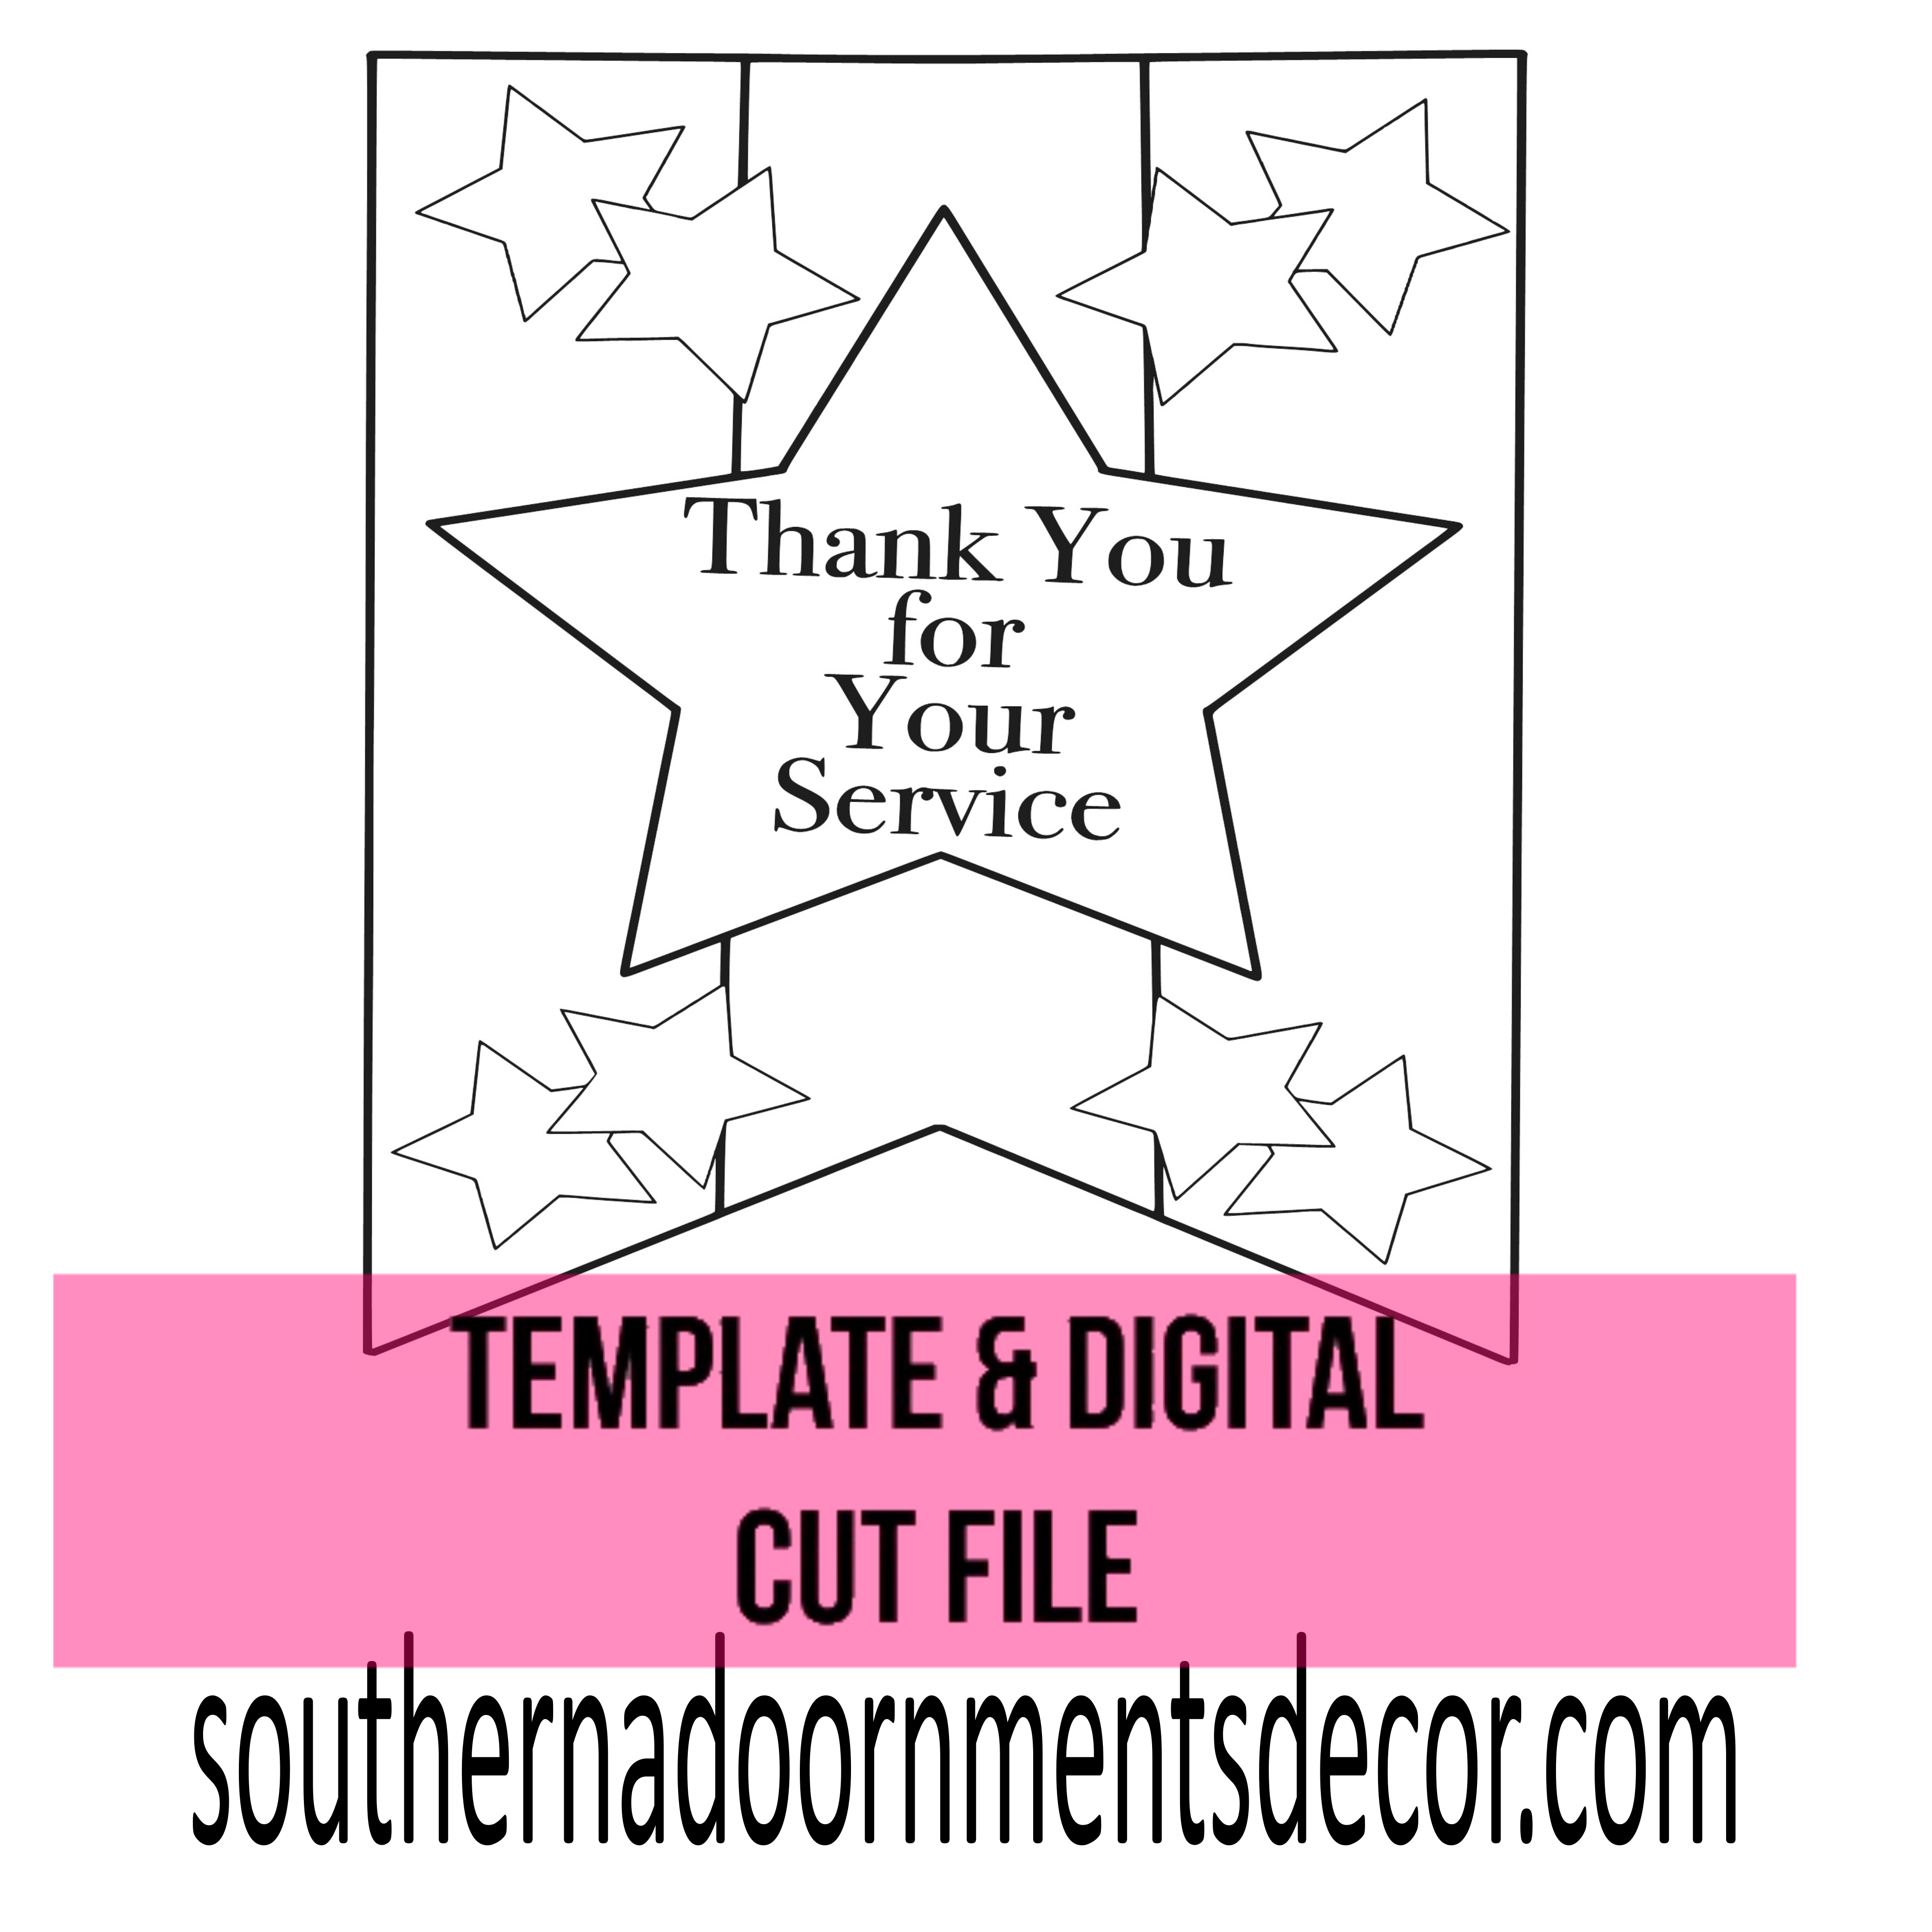 Thank You for Your Service Template & Digital Cut File